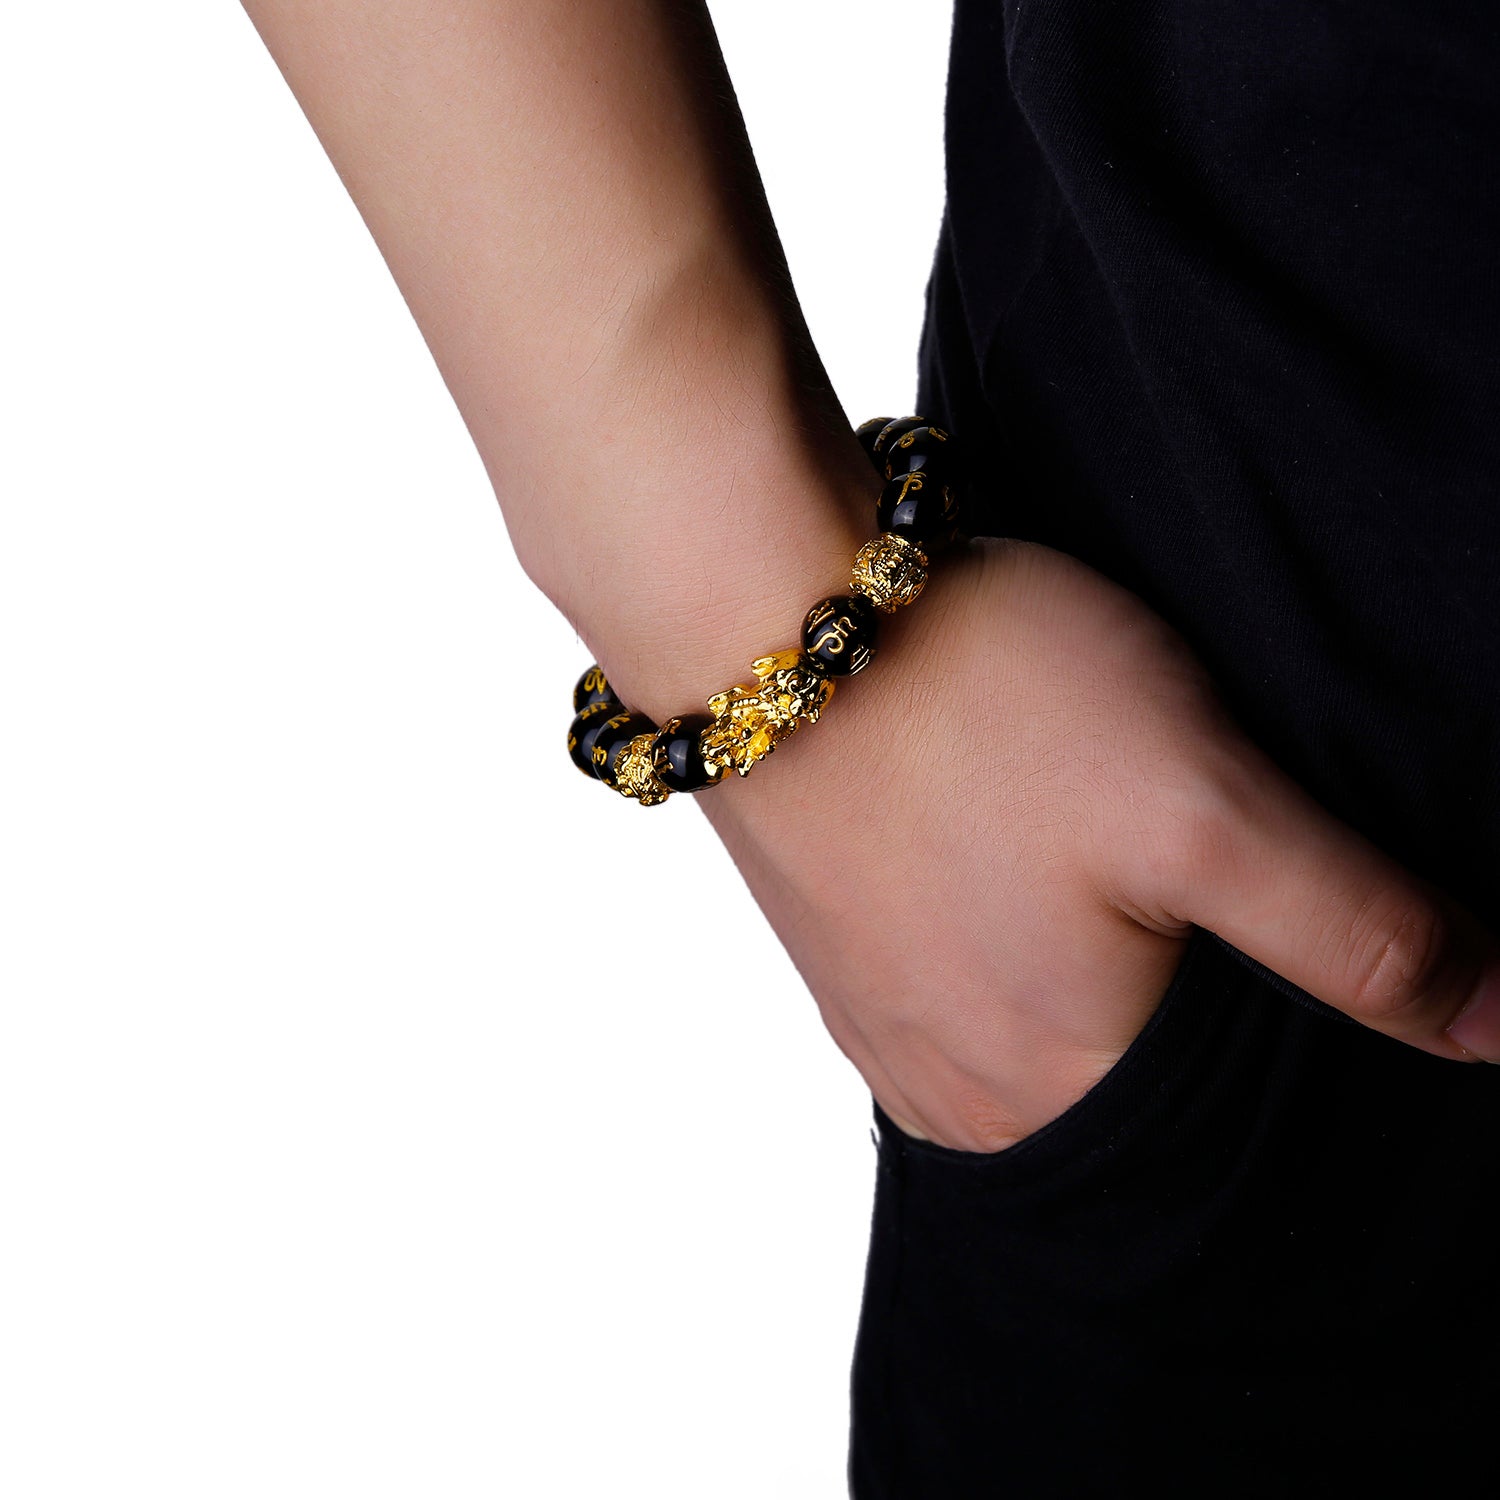 Feng Shui Pixiu Bracelet - Wealth, Fortune and Protection - TeamPlanting